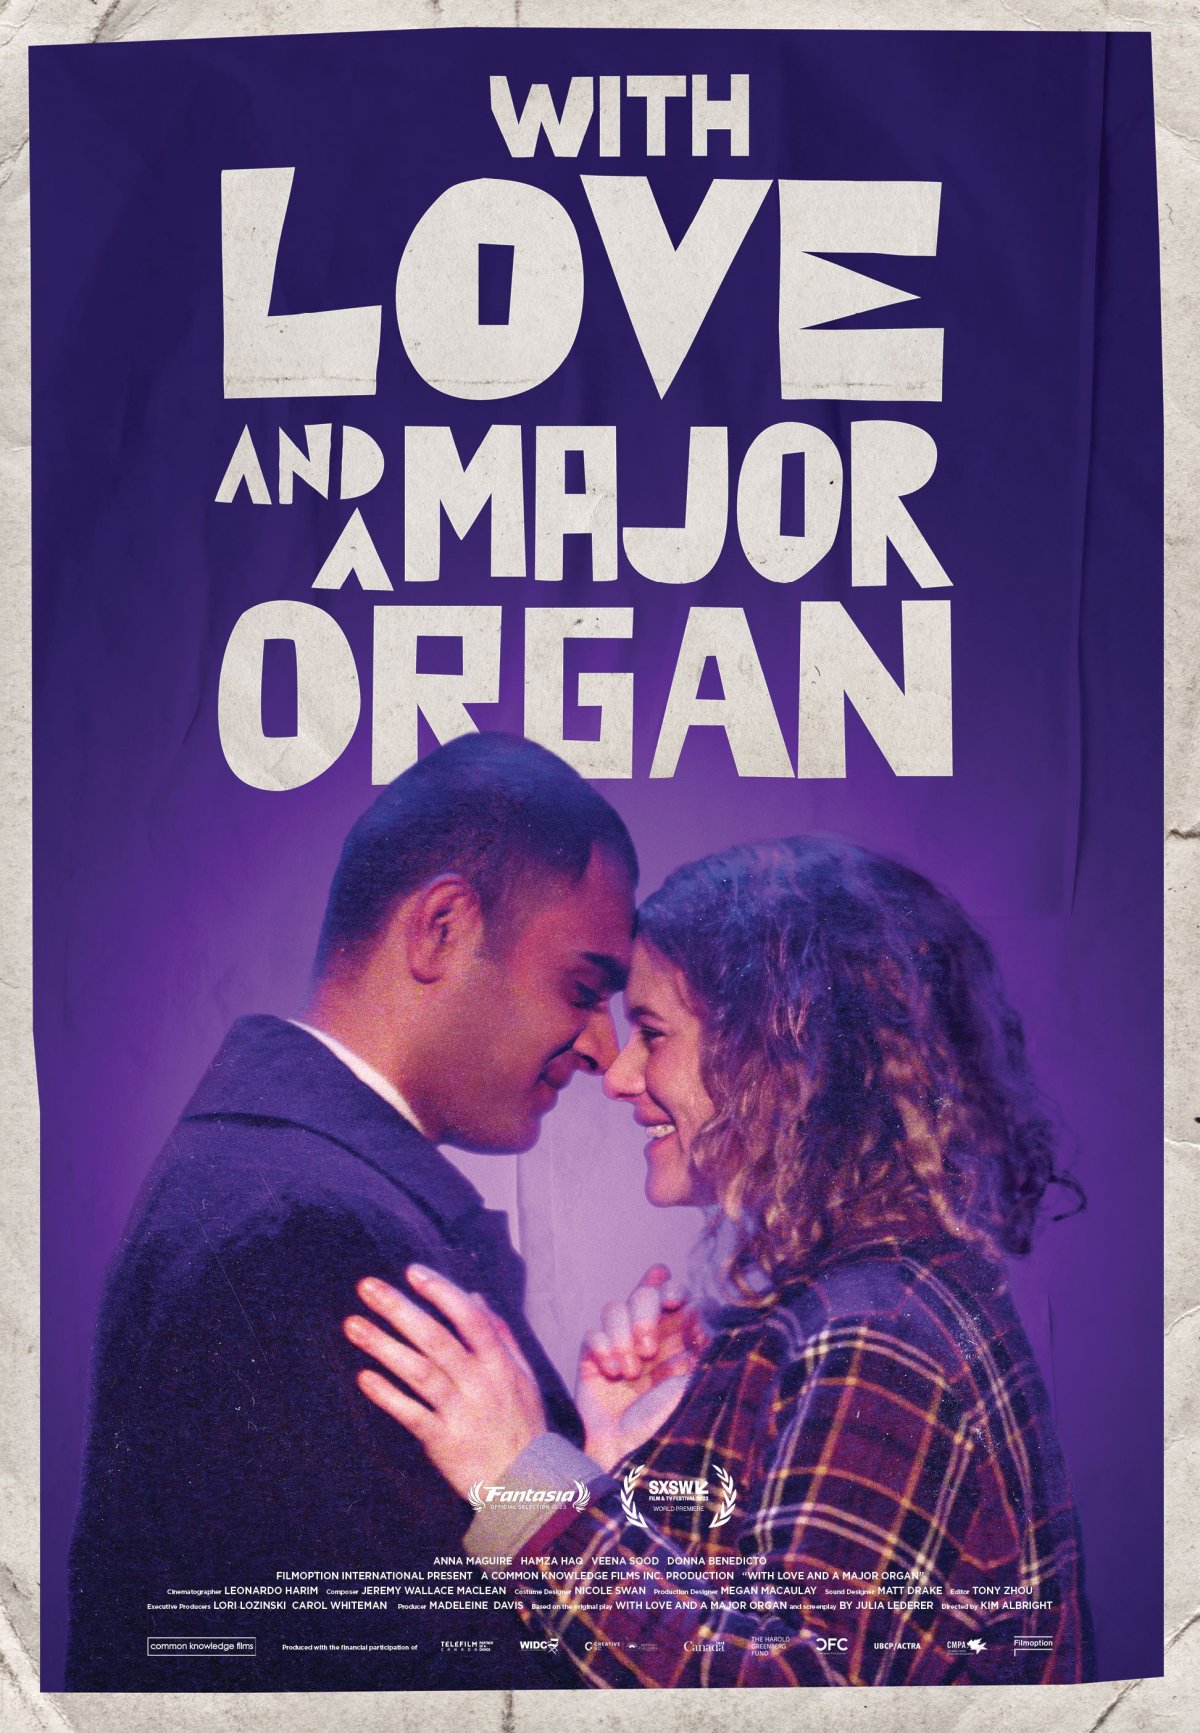 With Love And A Major Organ Screening - image